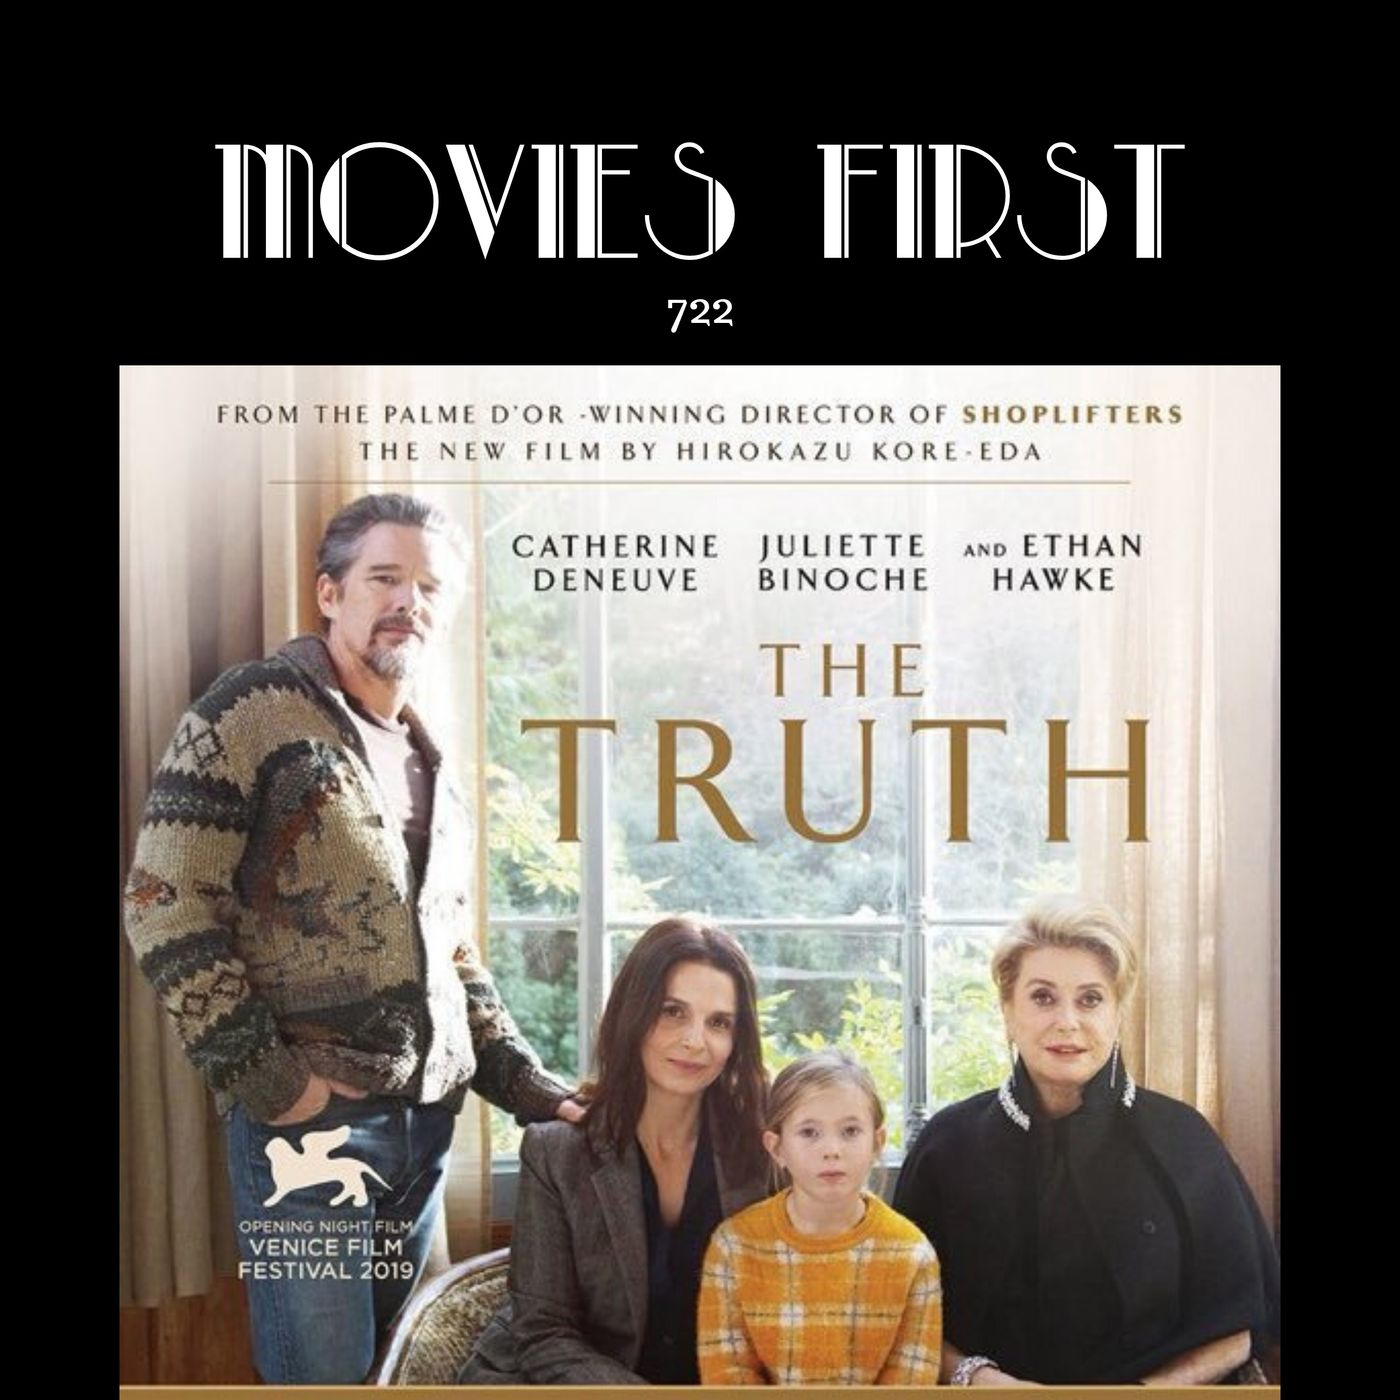 722: The Truth (La vérité ) (Drama) (the @MoviesFirst review)